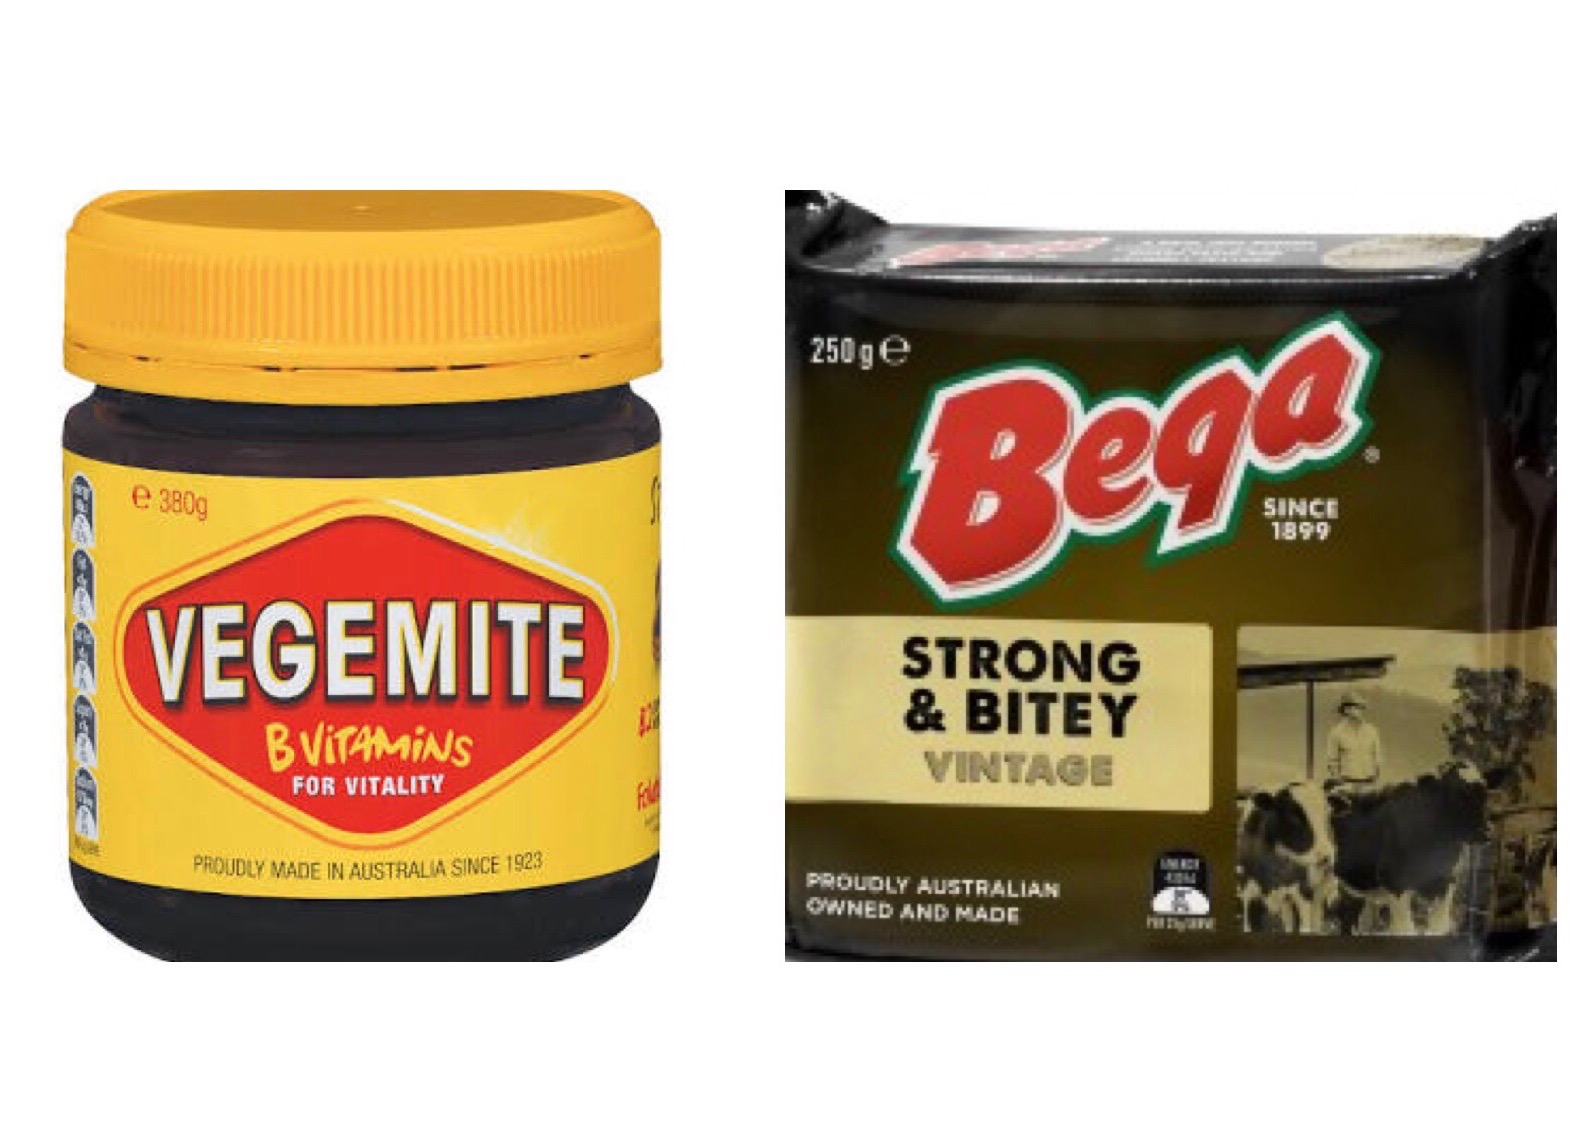 Mums and dads of Bega to share in Vegemite coup